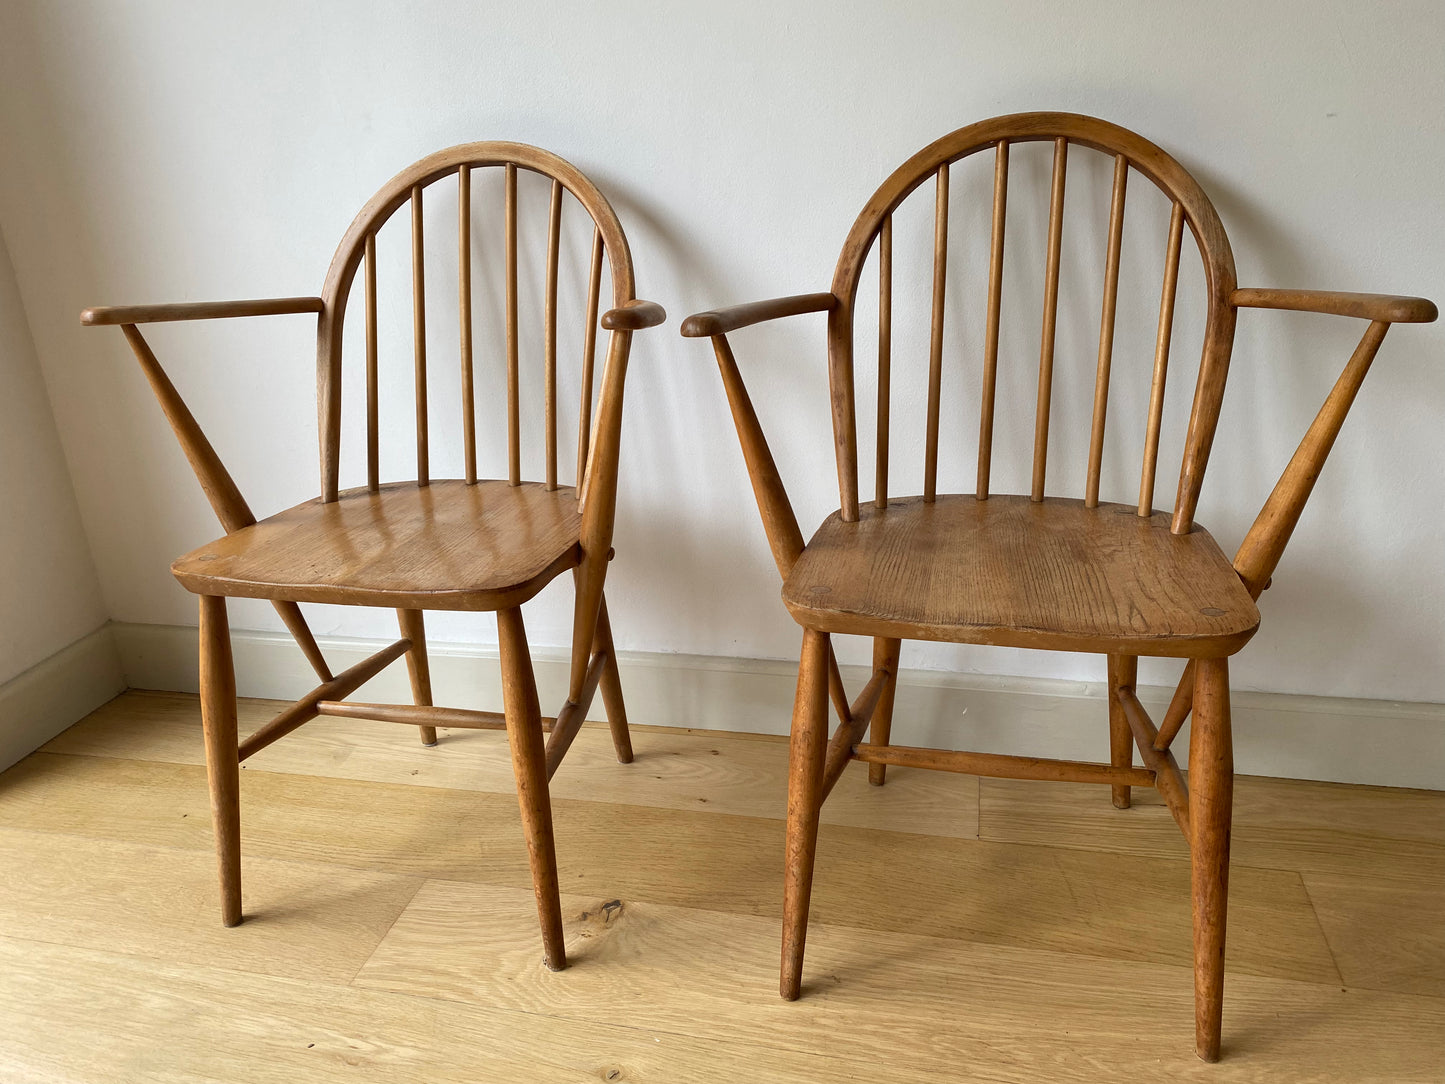 Ercol Windsor mid-century carver chairs